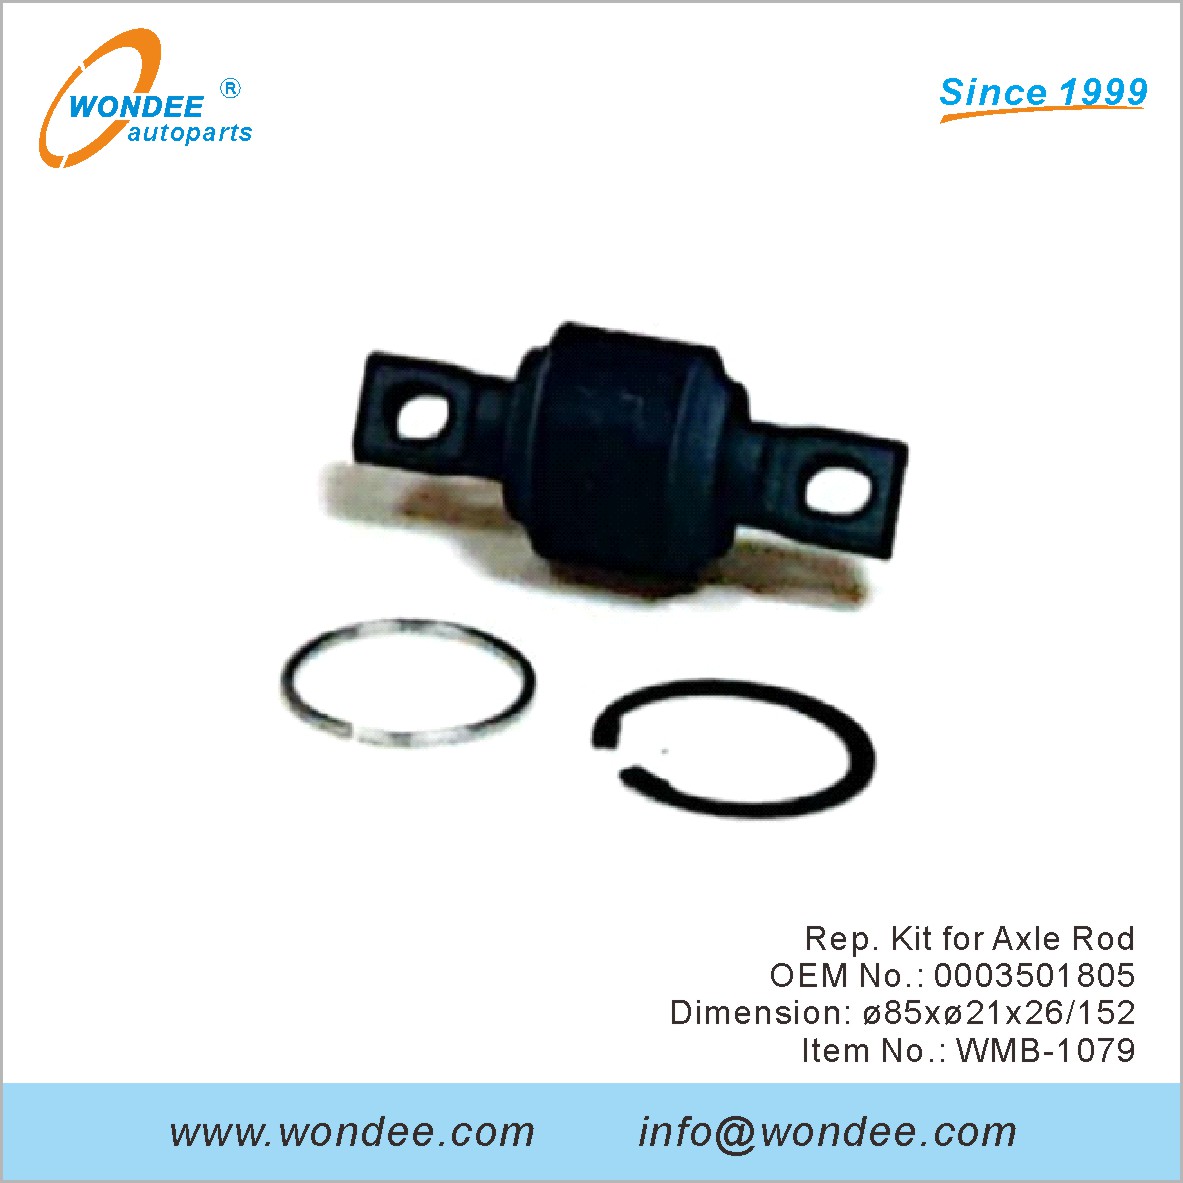 Rep. Kit for Axle Rod OEM 0003501805 for Benz from WONDEE